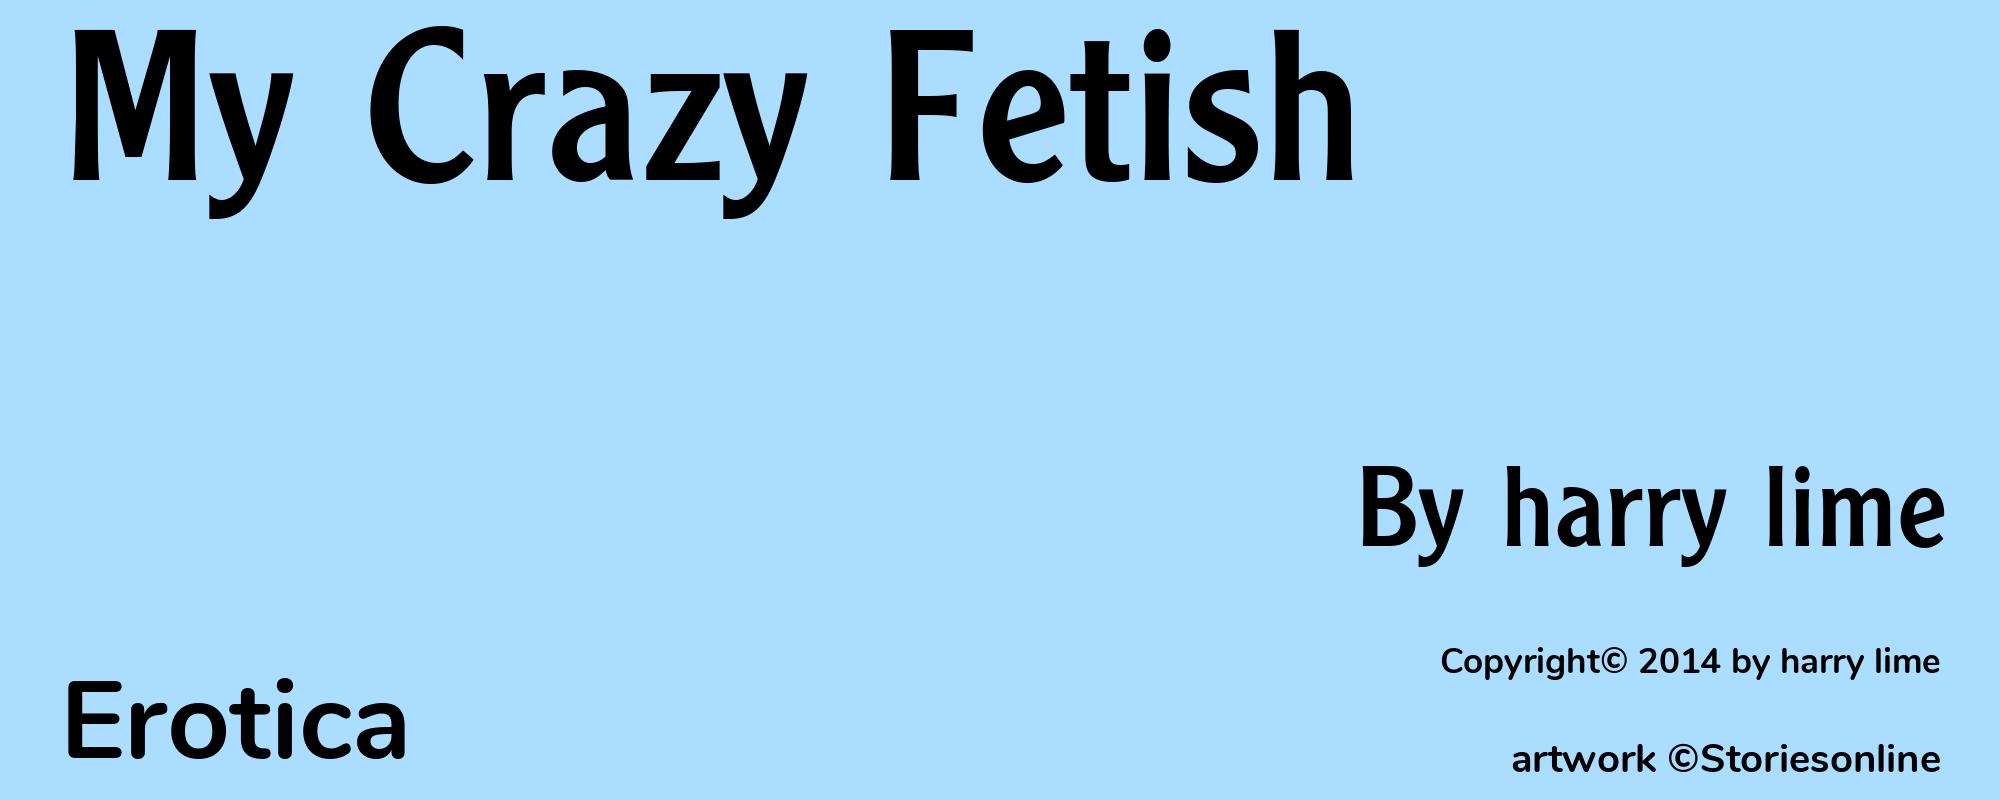 My Crazy Fetish - Cover